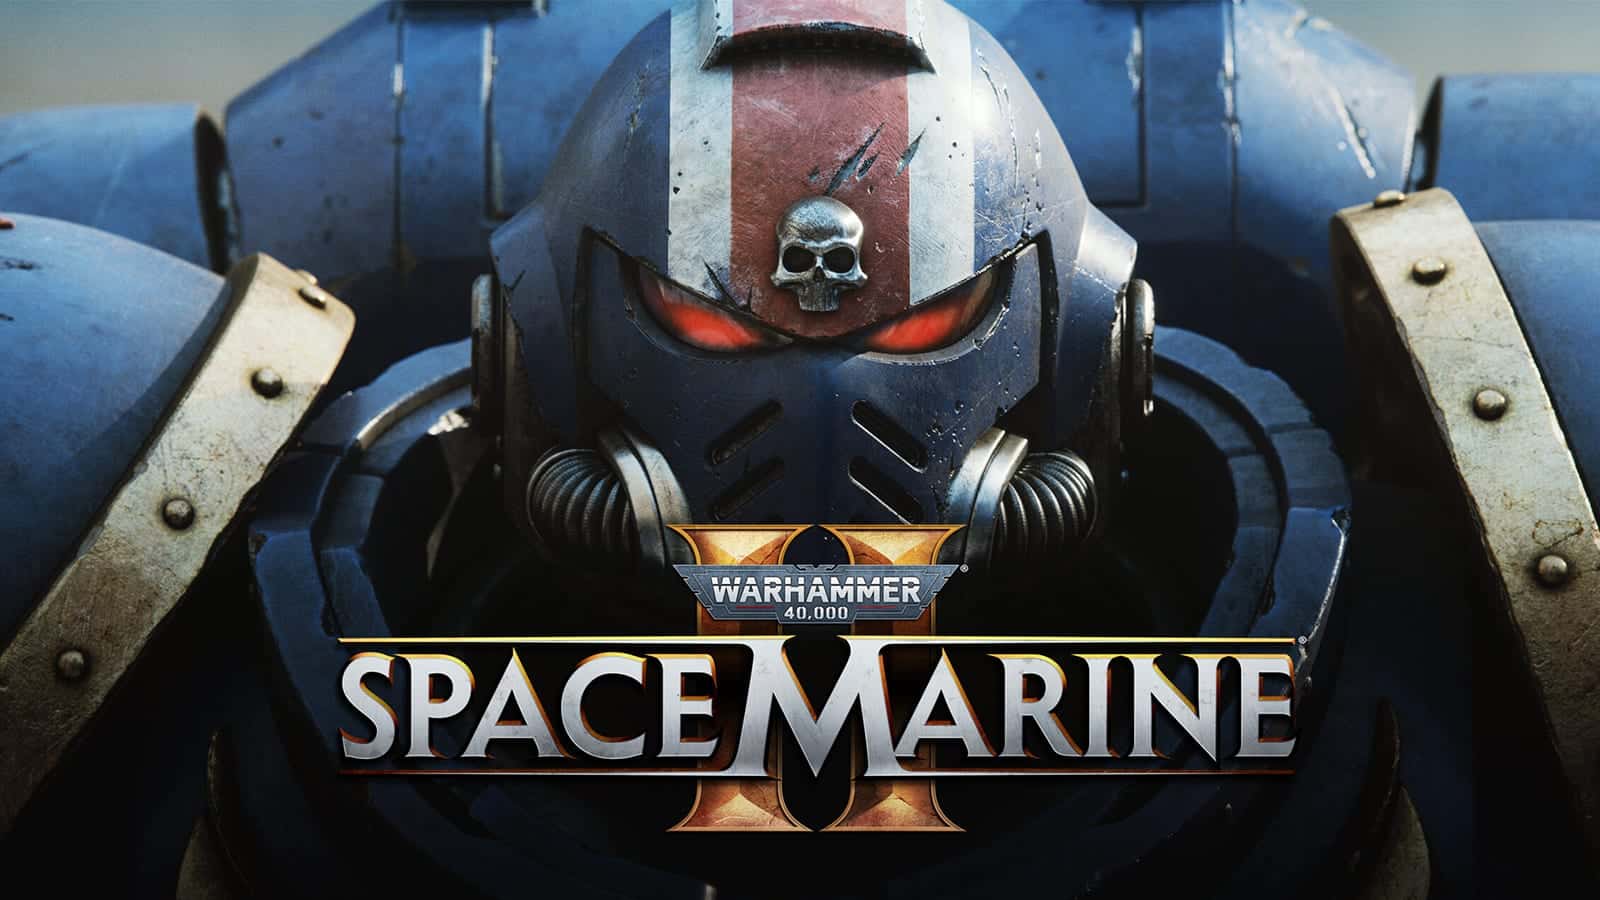 Warhammer 40,000: Space Marine 2 Unlikely to Release in 2022